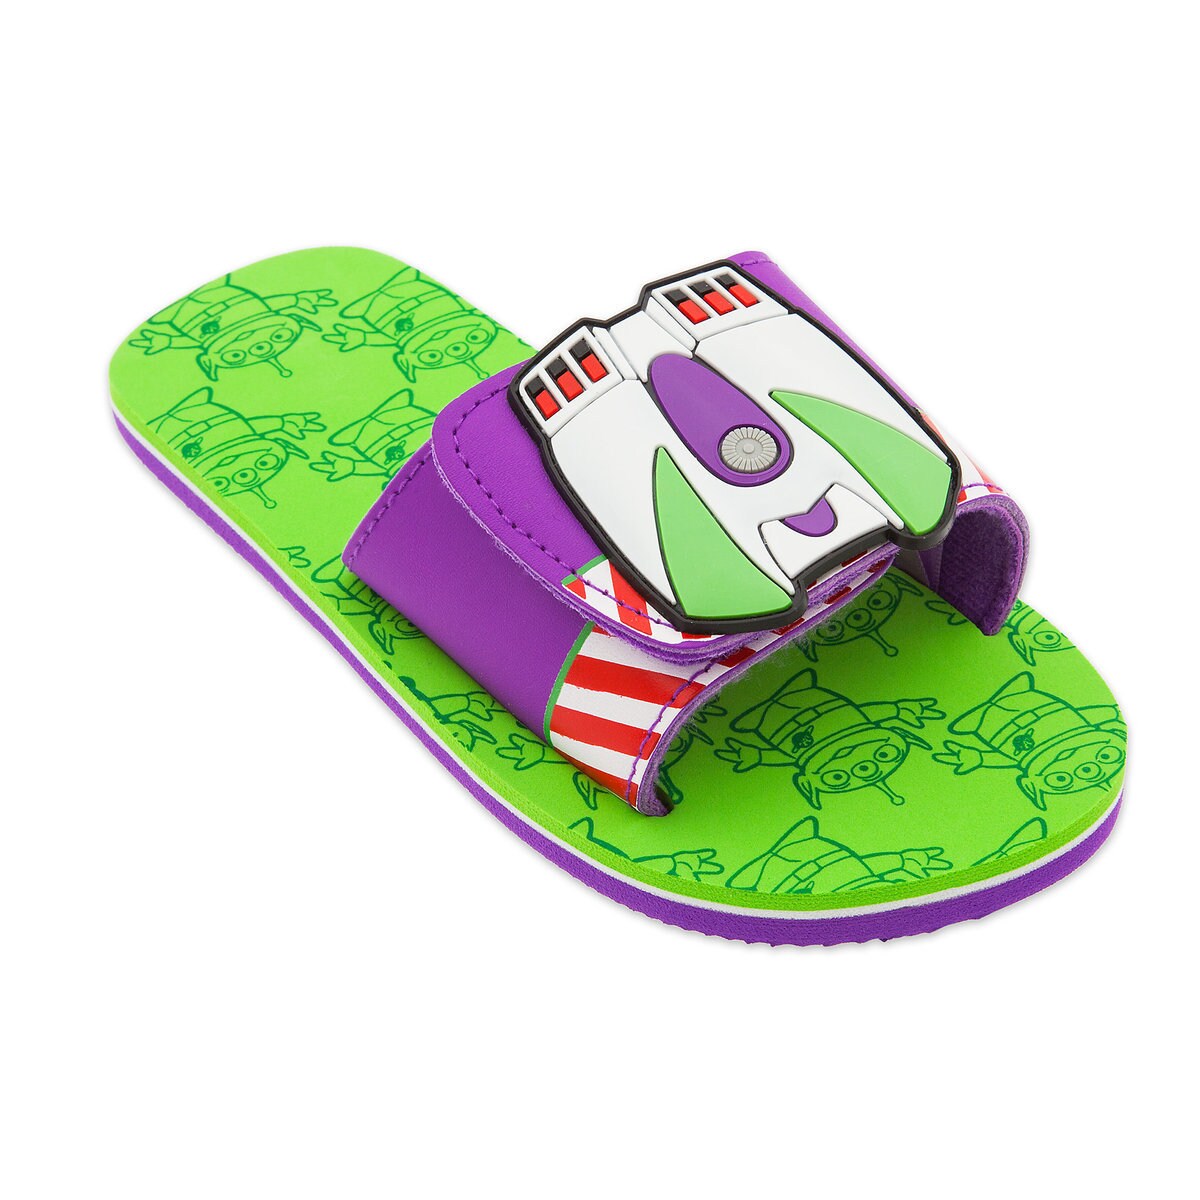 Product Image of Buzz Lightyear and Toy Story Alien Sandals for Kids # 1